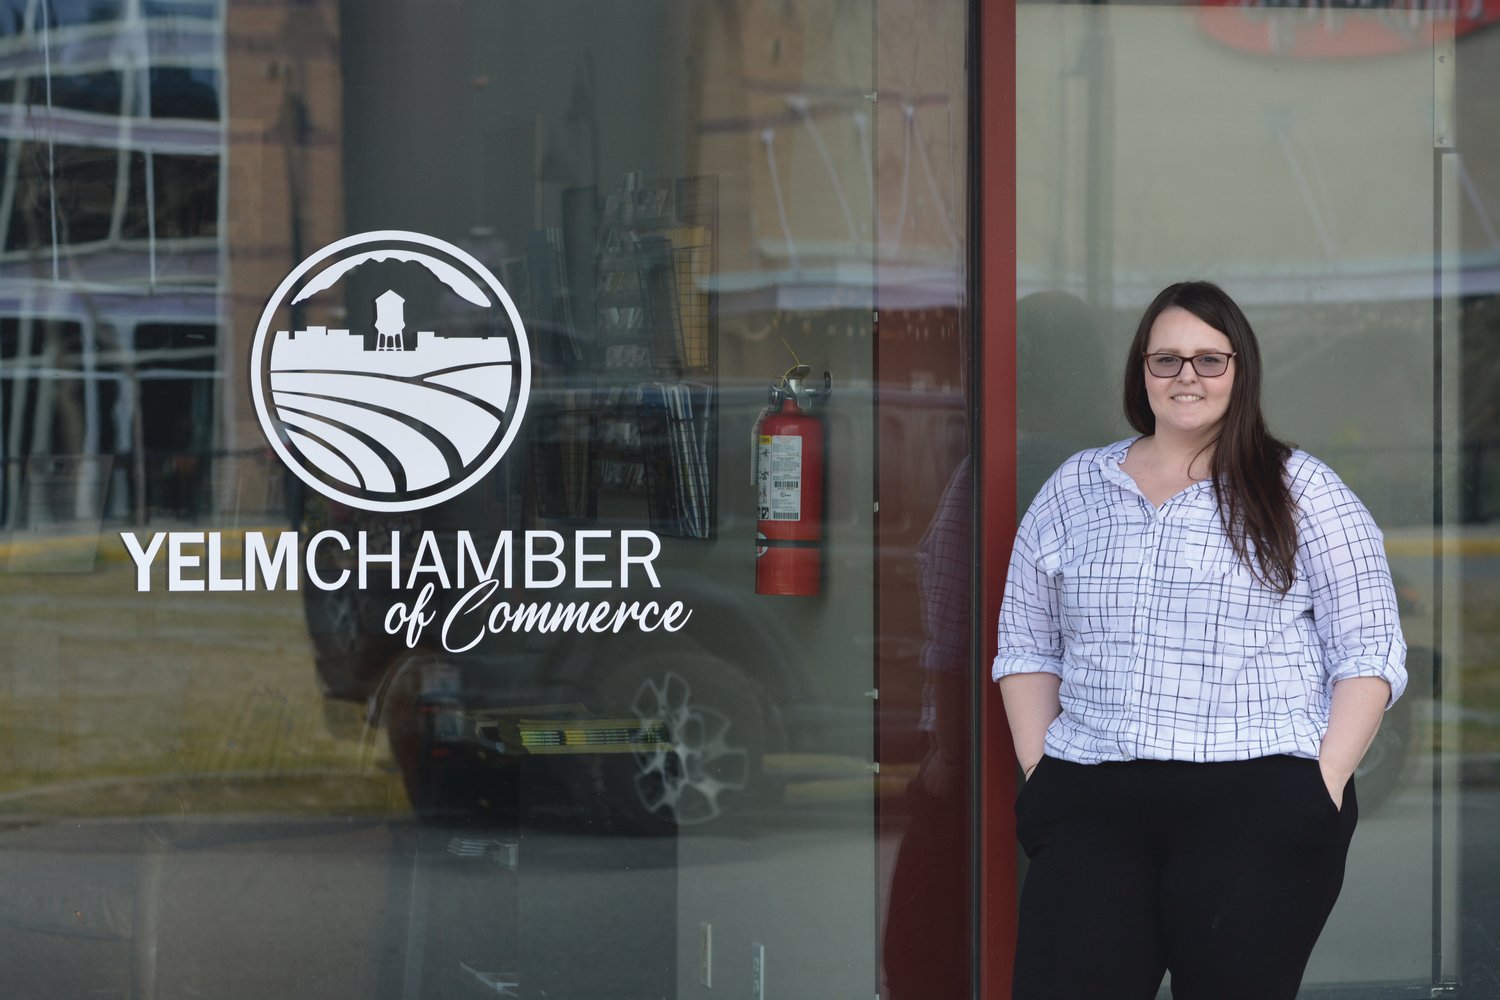 Amanda Muñoz began her role as the Yelm Chamber of Commerce’s executive director on Feb. 27.